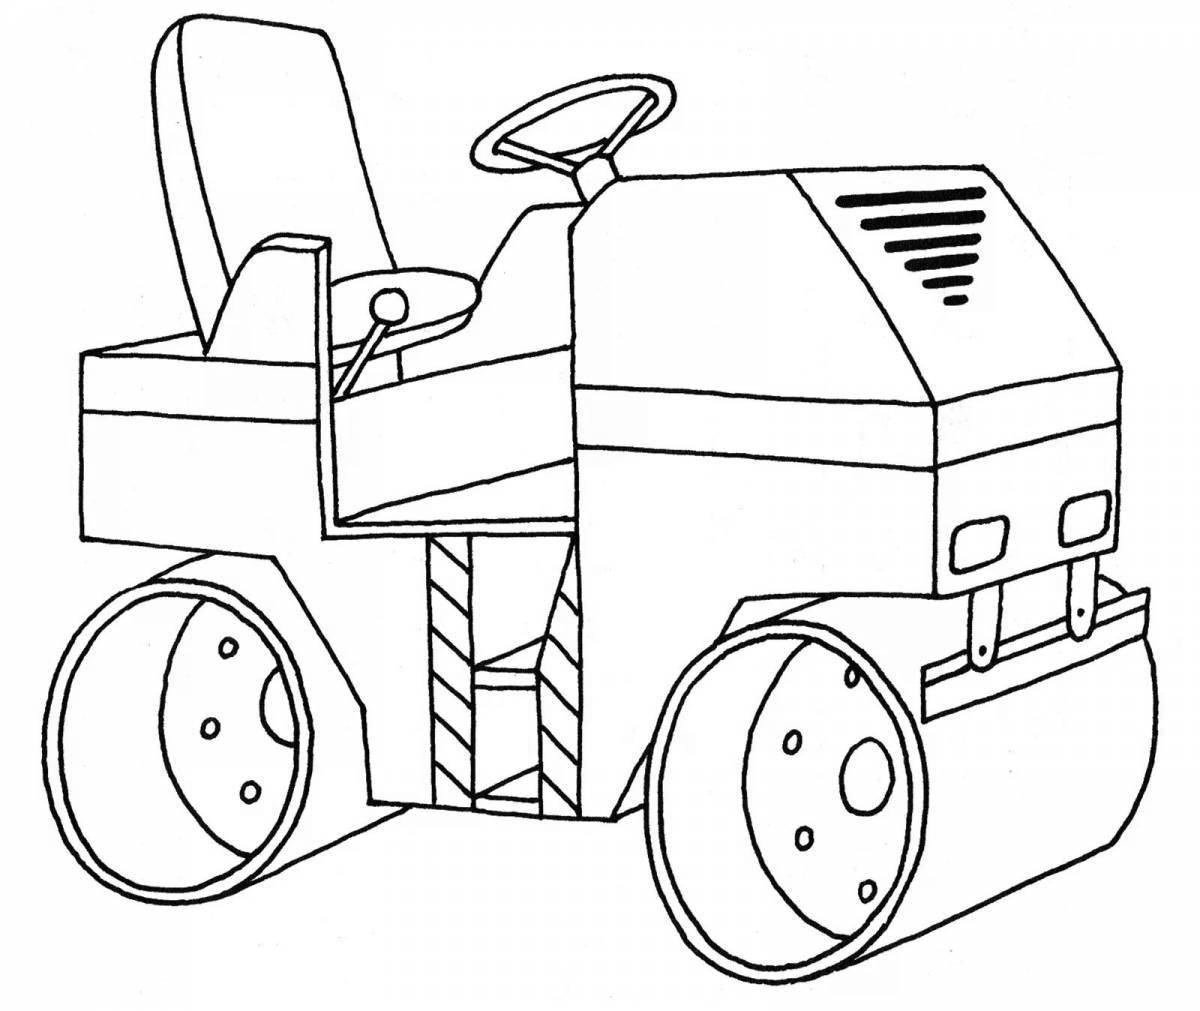 Snowblower awesome coloring book for kids